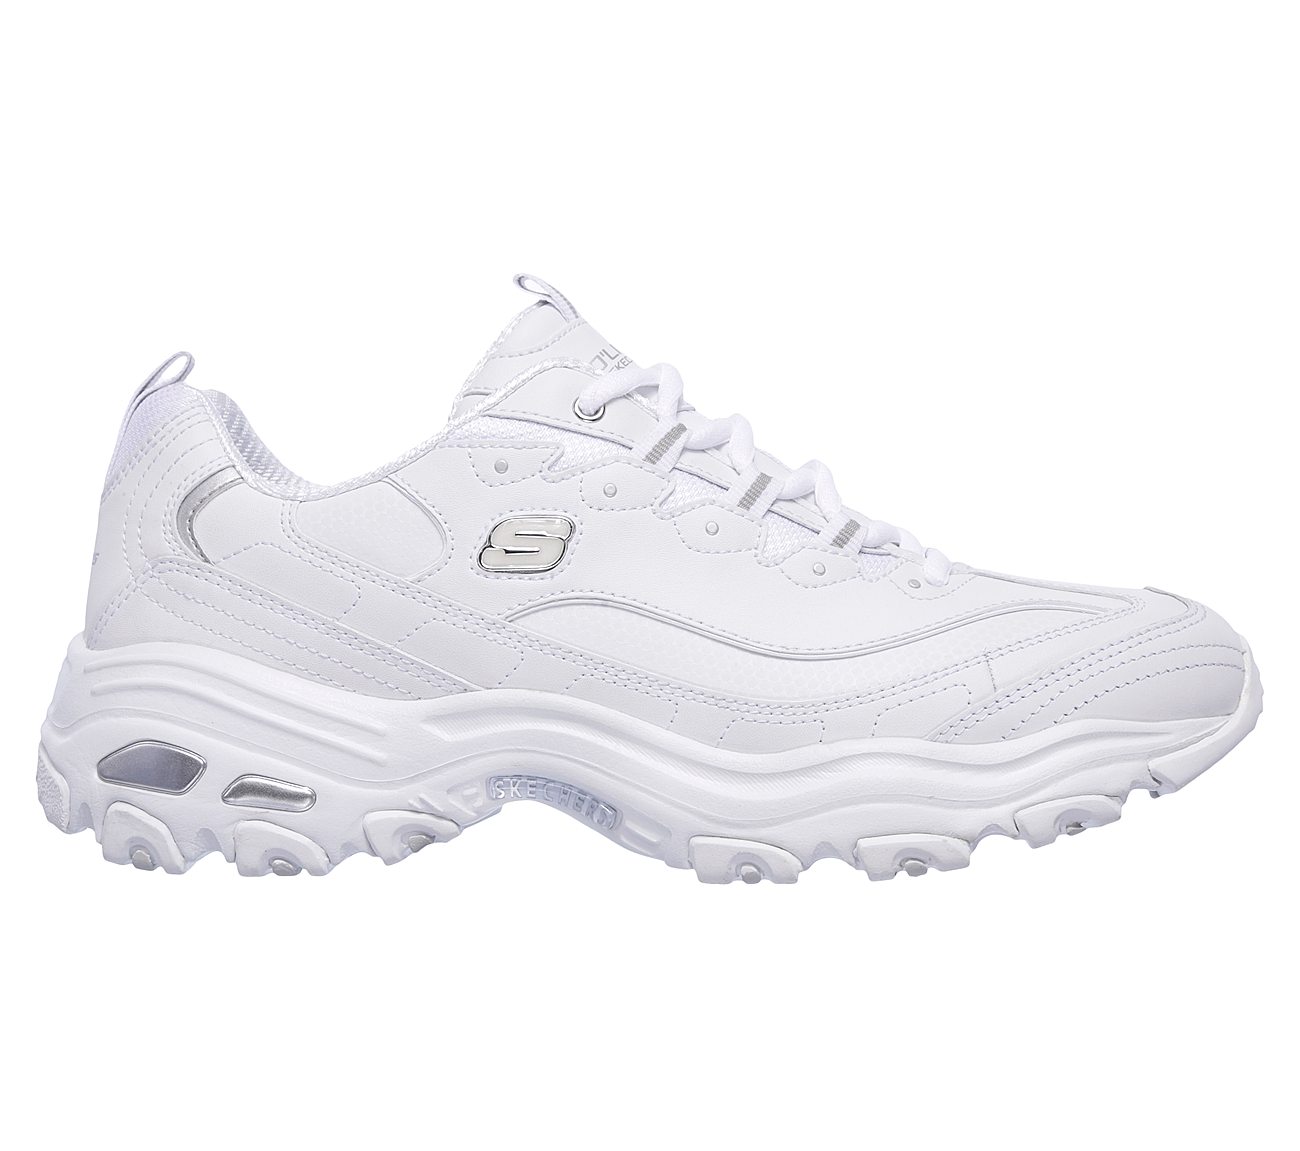 skechers white shoes mens Sale,up to 61 